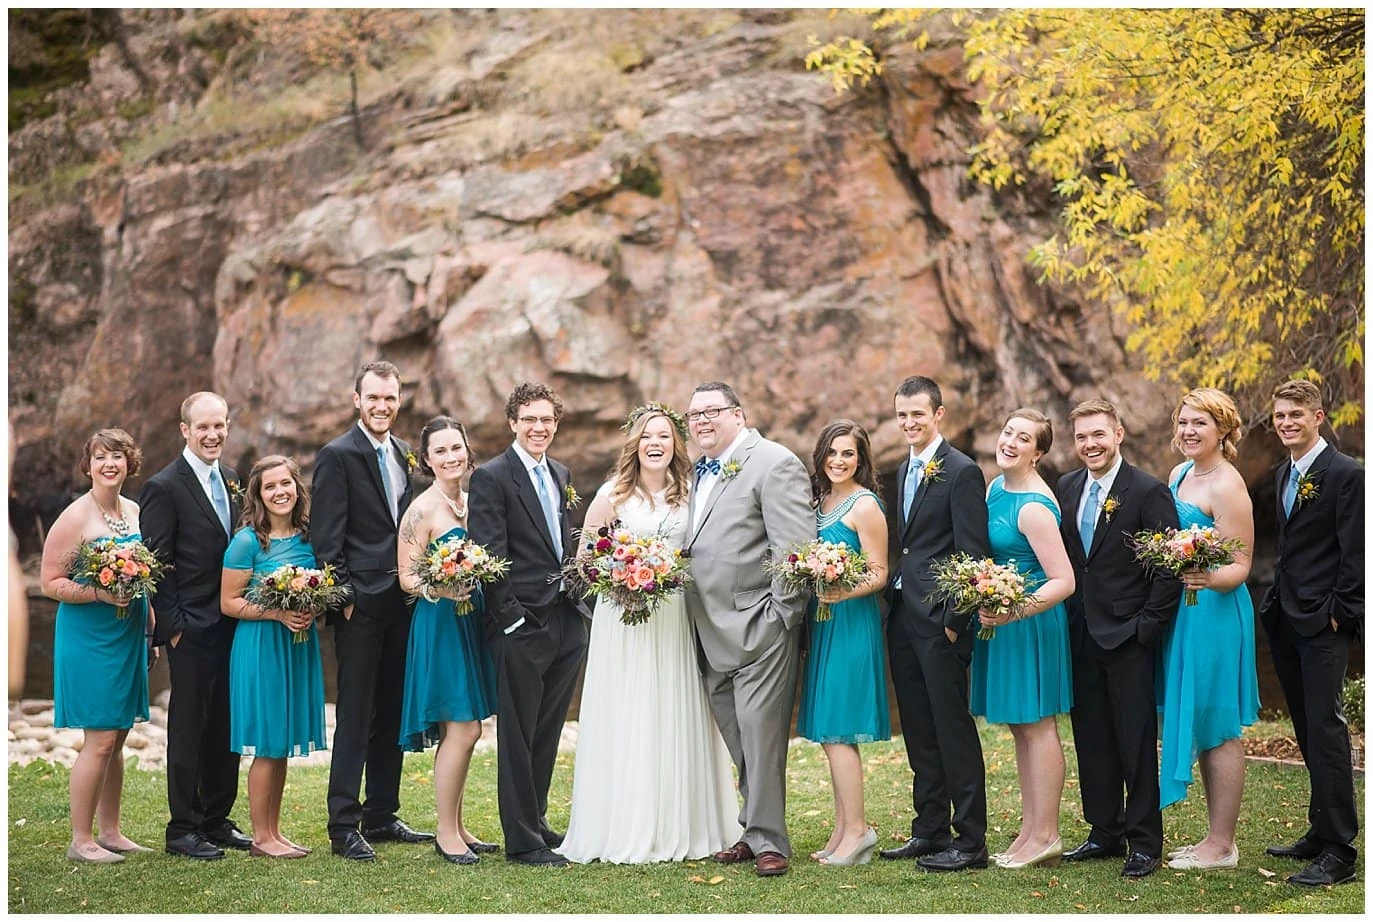 bridal party by riverside at Lyons Riverbend wedding by Lyons wedding photographer Jennie Crate